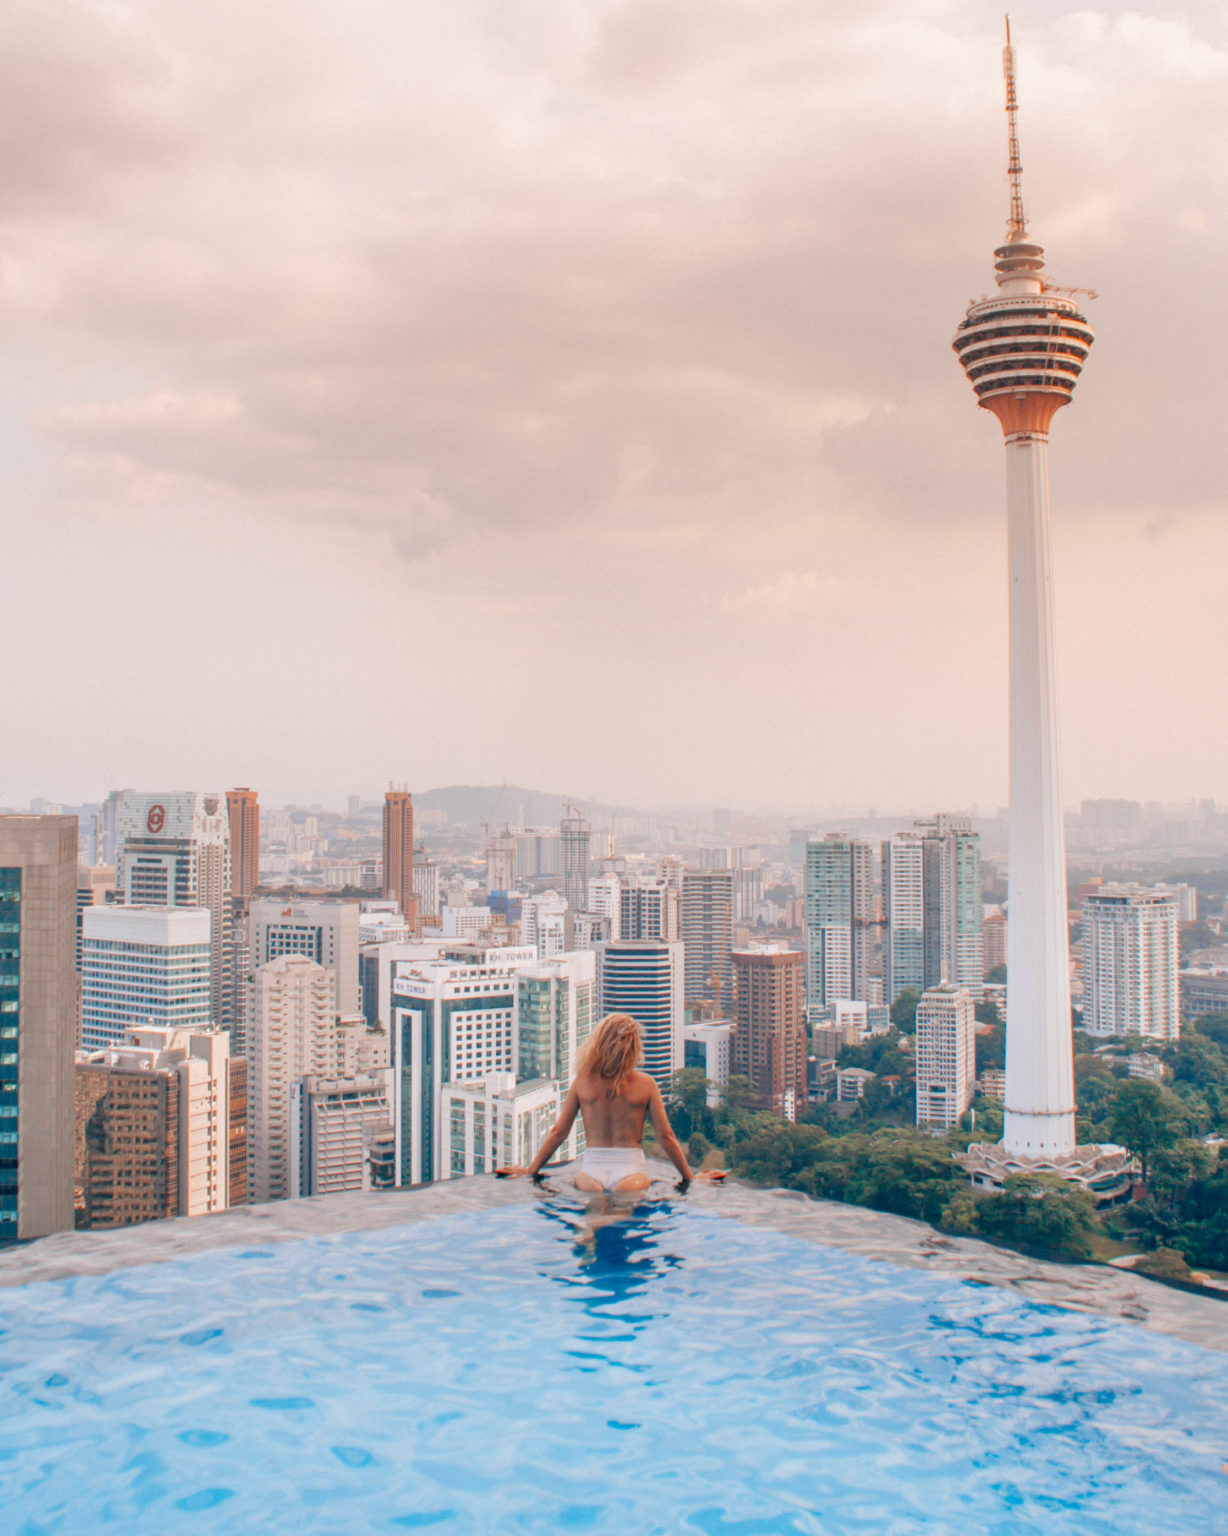 48 hours in Kuala Lumpur  full itinerary & best things to do!